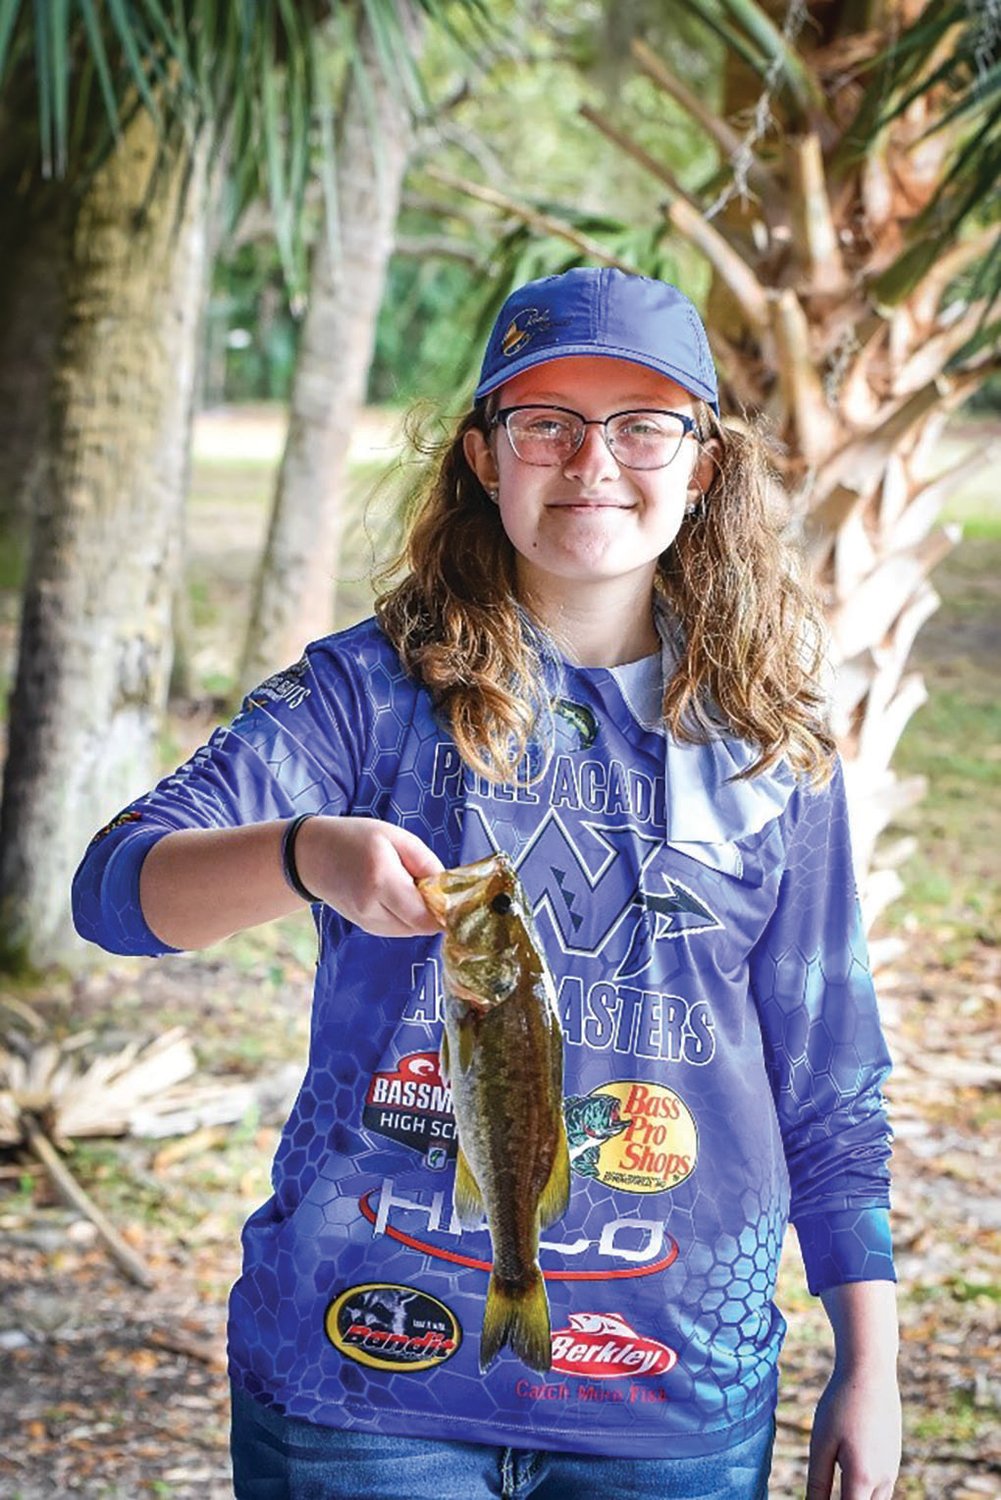 The deadline for submitting Florida Sport Fish Restoration R3 Fishing Grant applications is Jan. 15 at 5 p.m.